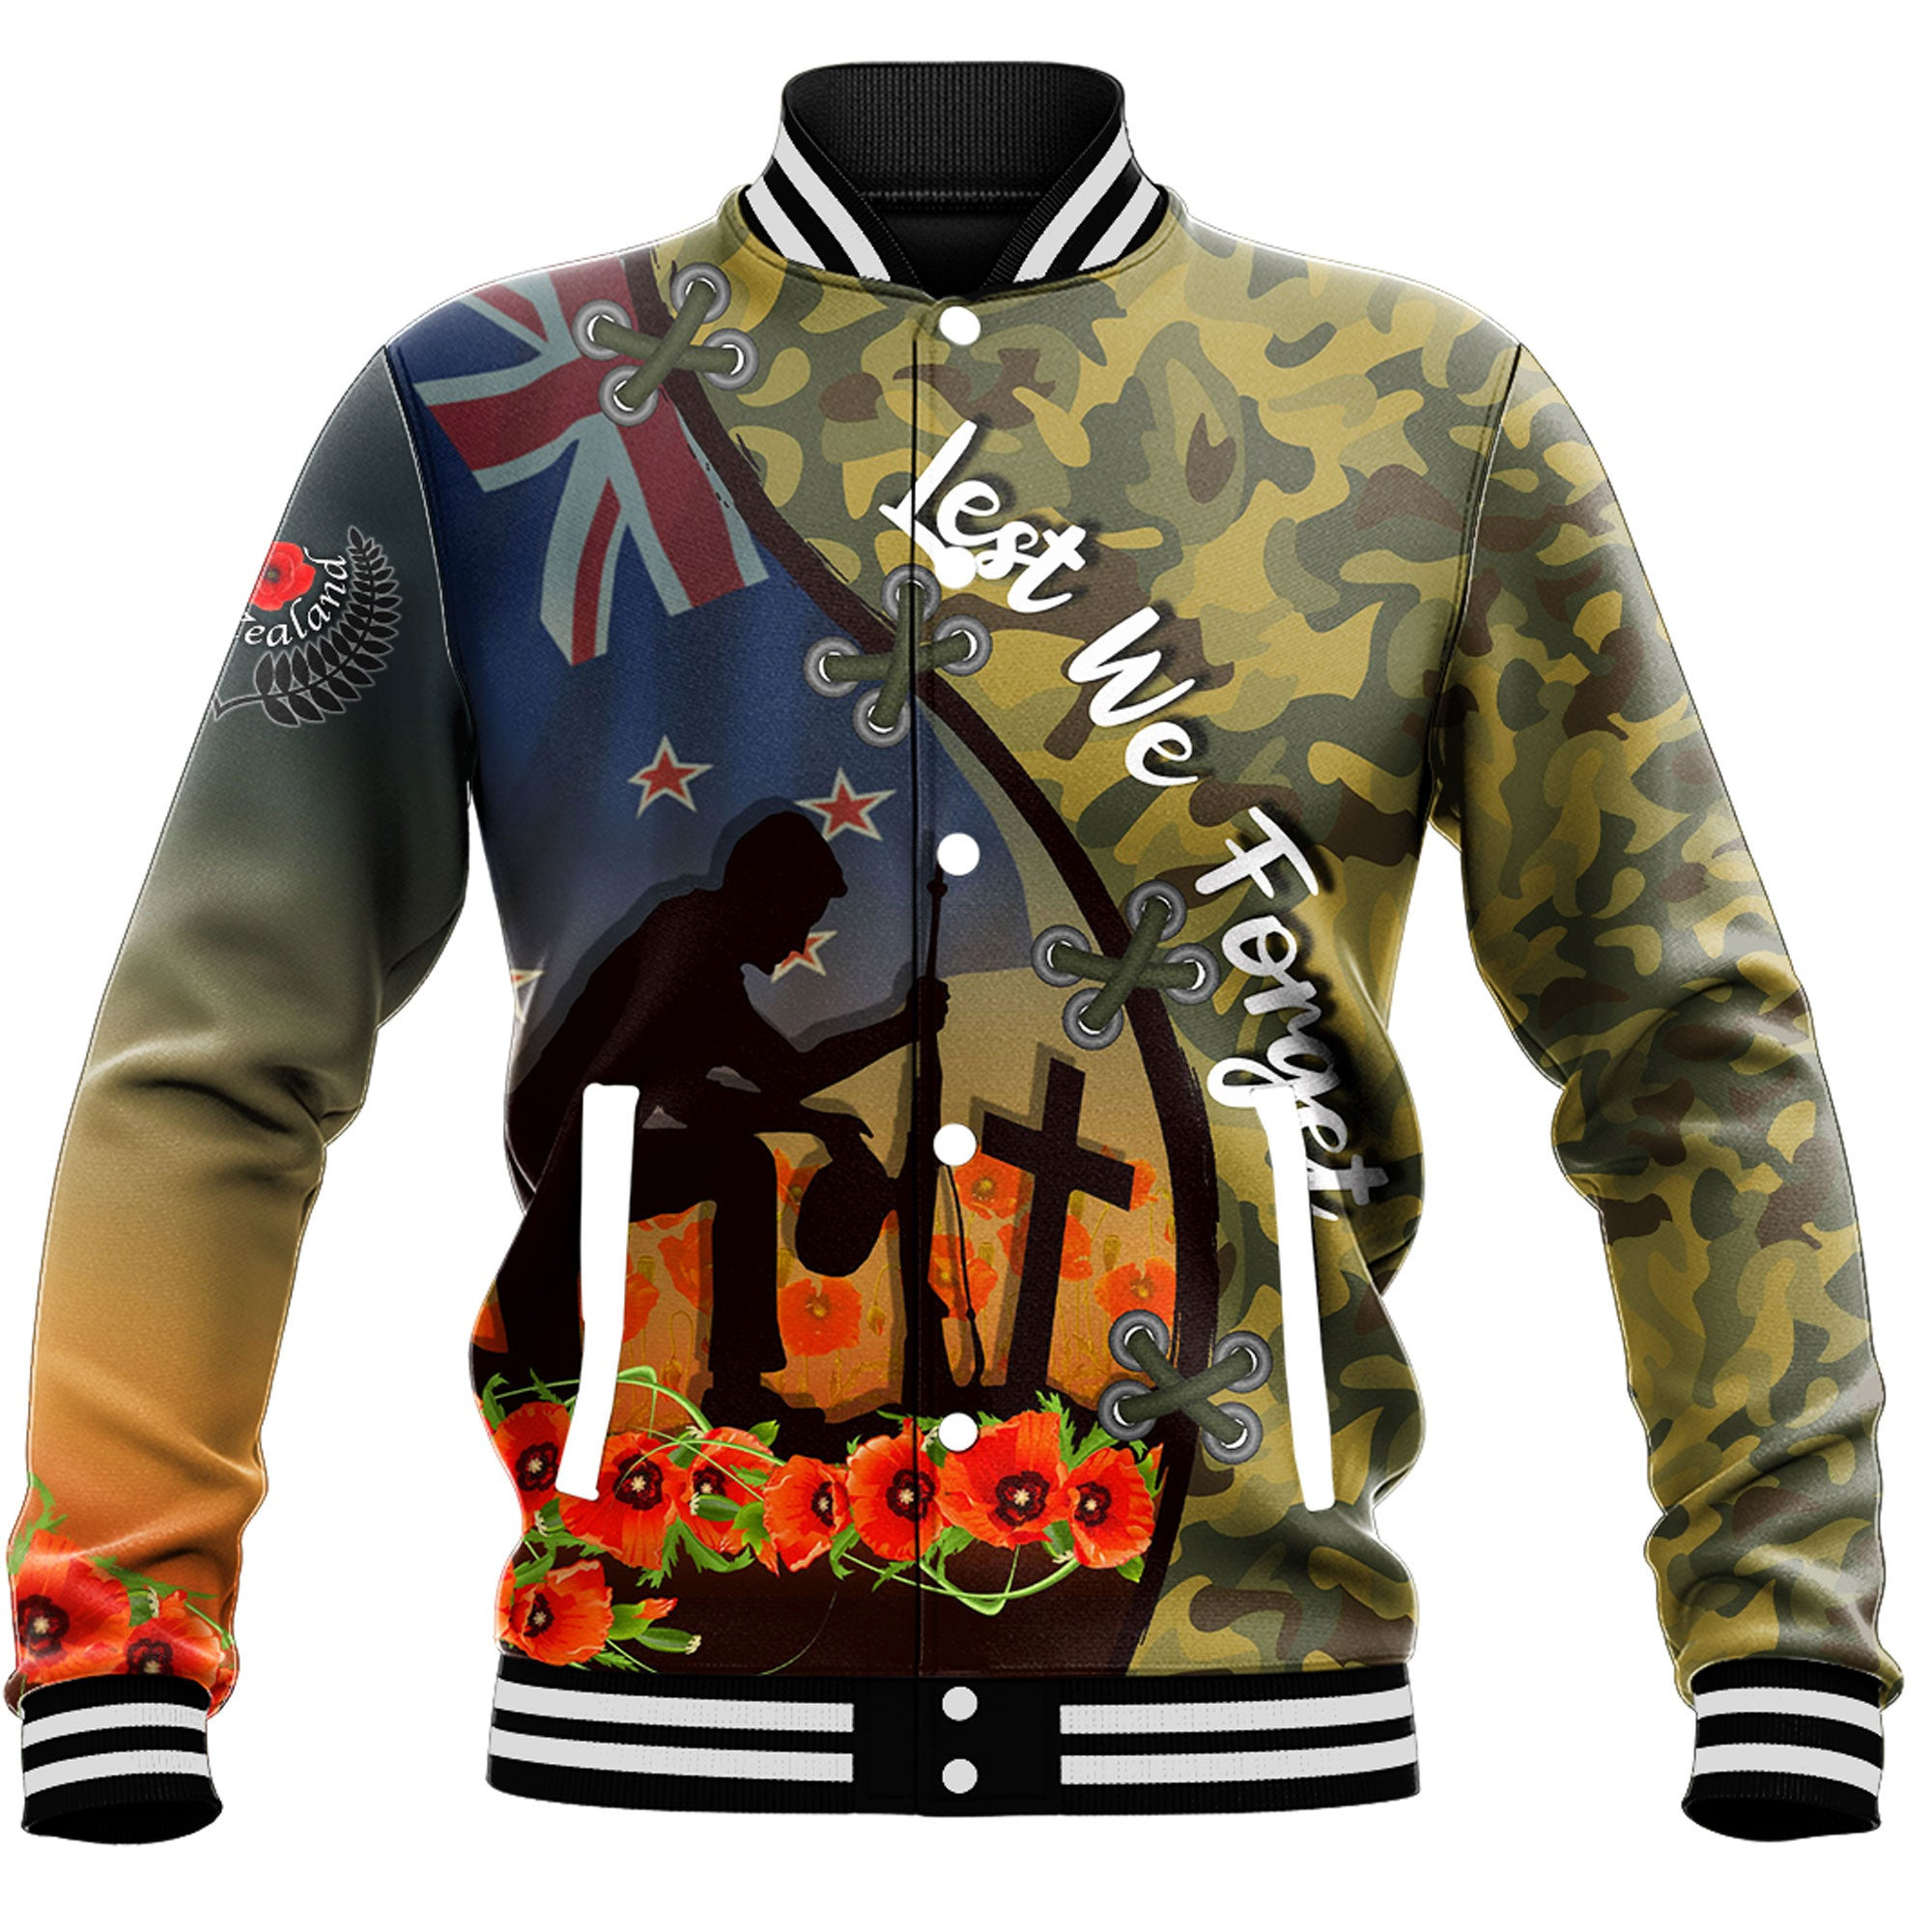 Love New Zealand Clothing - Anzac Day Camouflage Soldier New Zealand - Baseball Jackets A95 | Love New Zealand